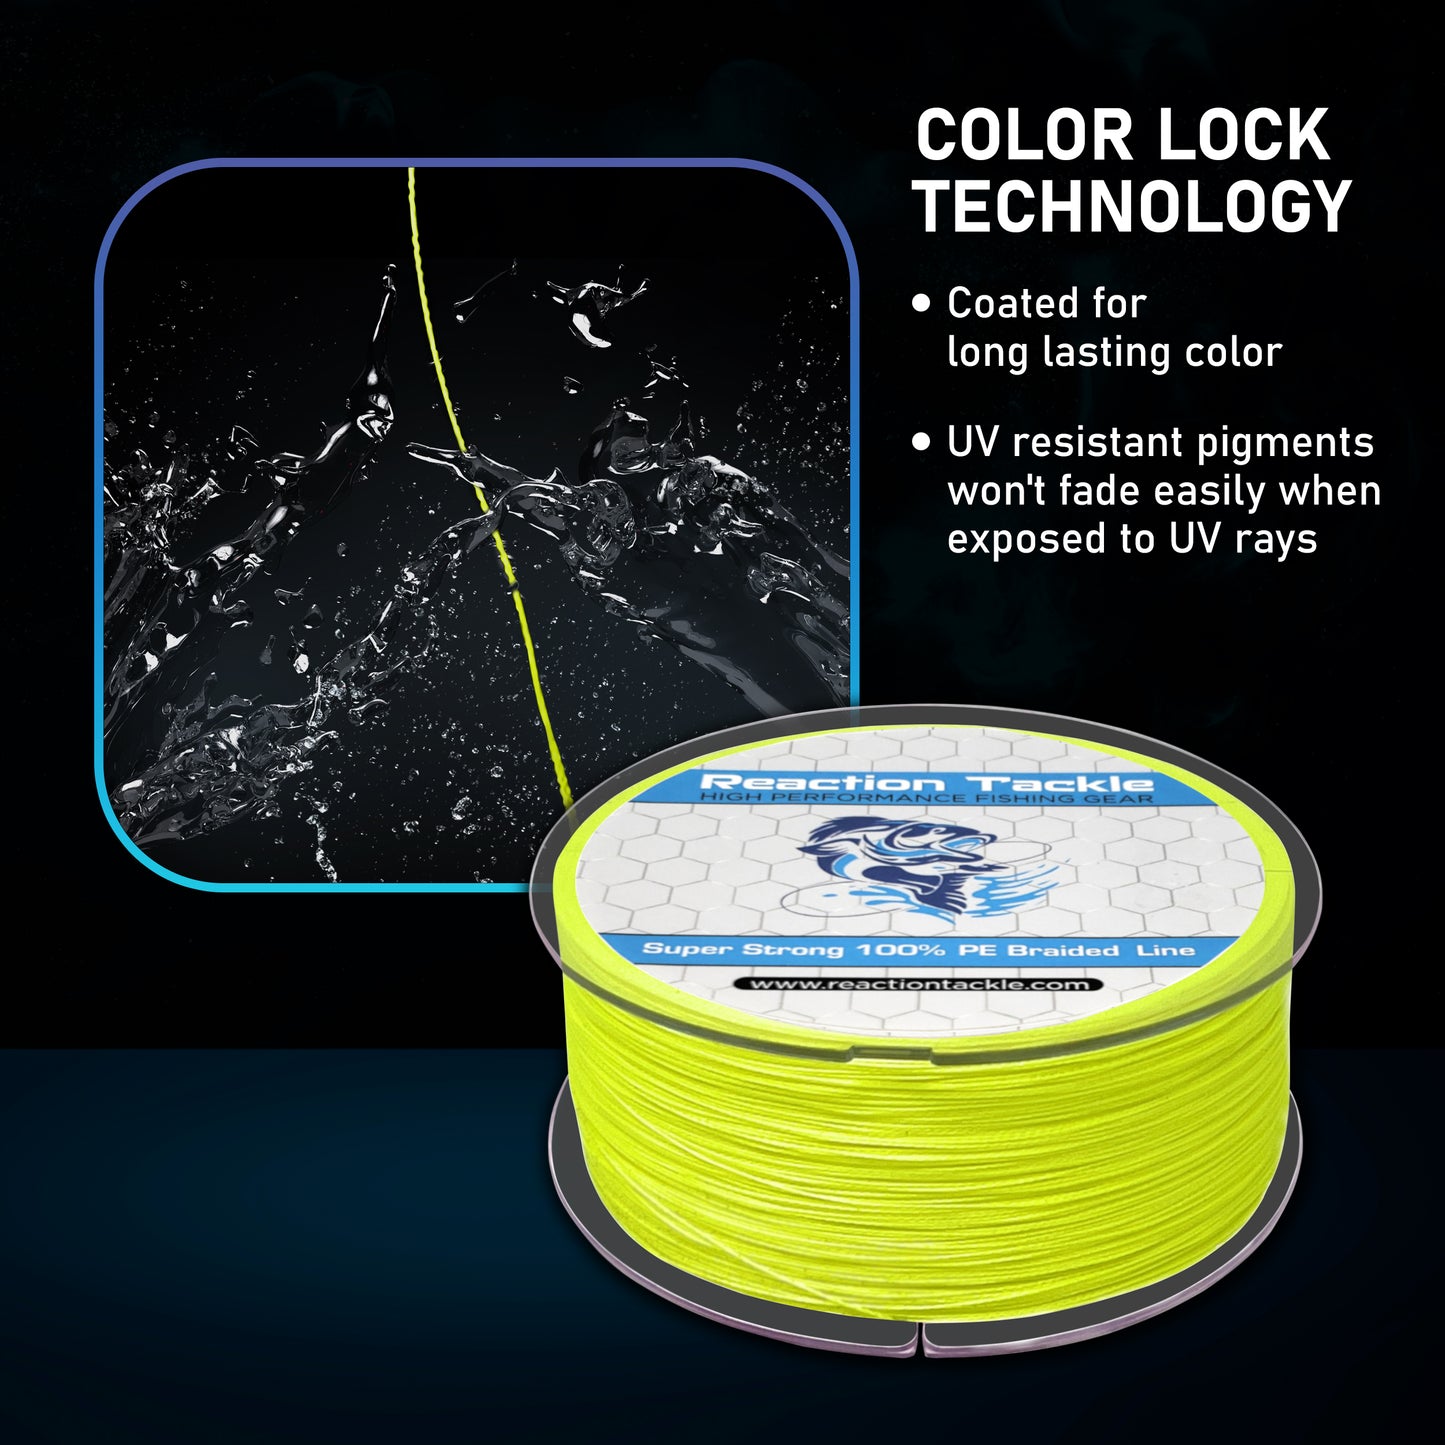 Reaction Tackle Braided Fishing Line- Sea Blue